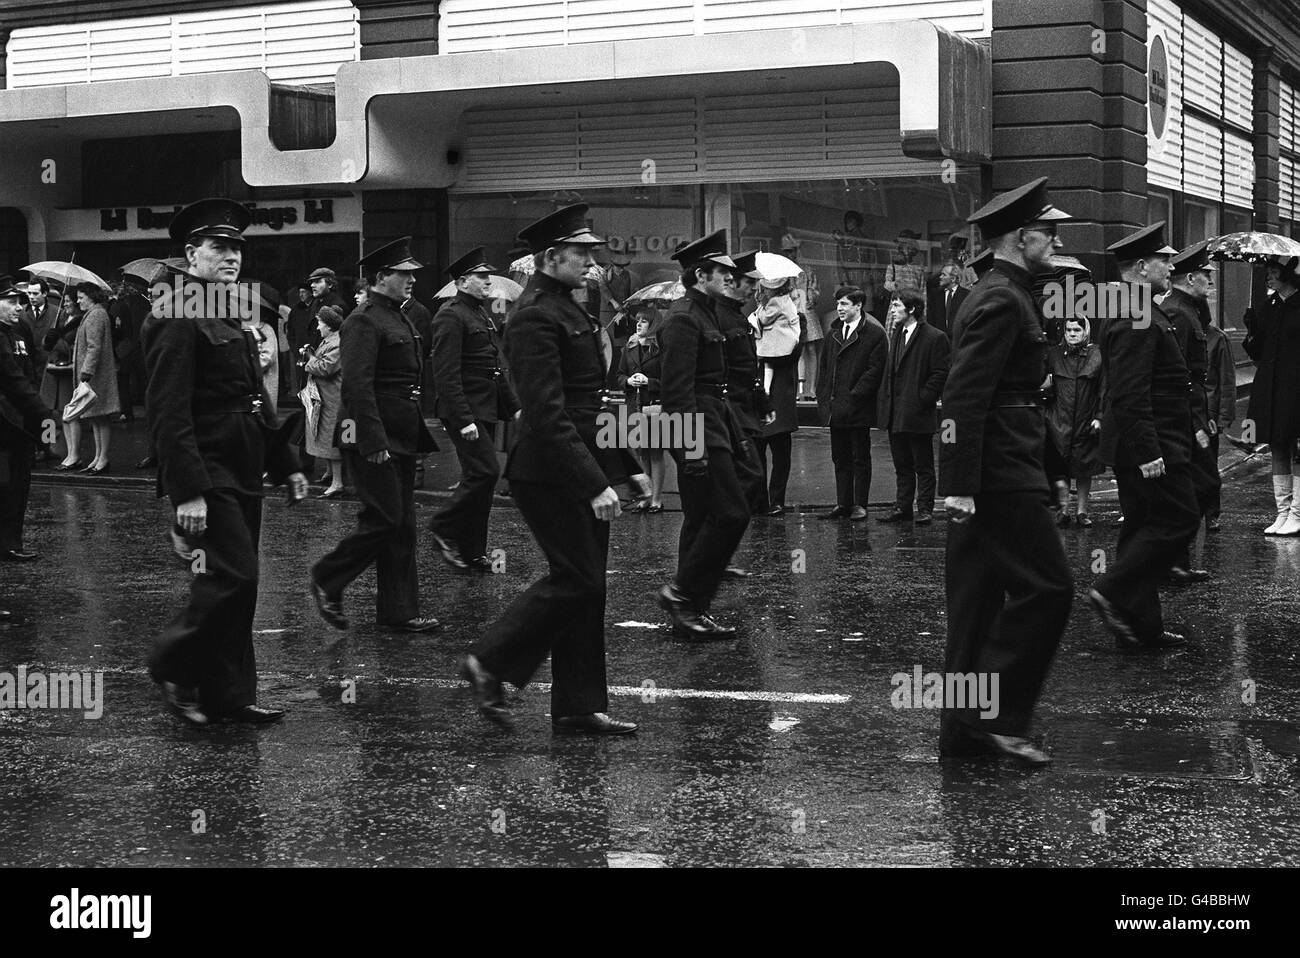 PA NEWS PHOTO 6/4/72 MEMBERS OF THE ULSTER SPECIAL CONSTABULARY PARADED THROUGH BELFAST Stock Photo